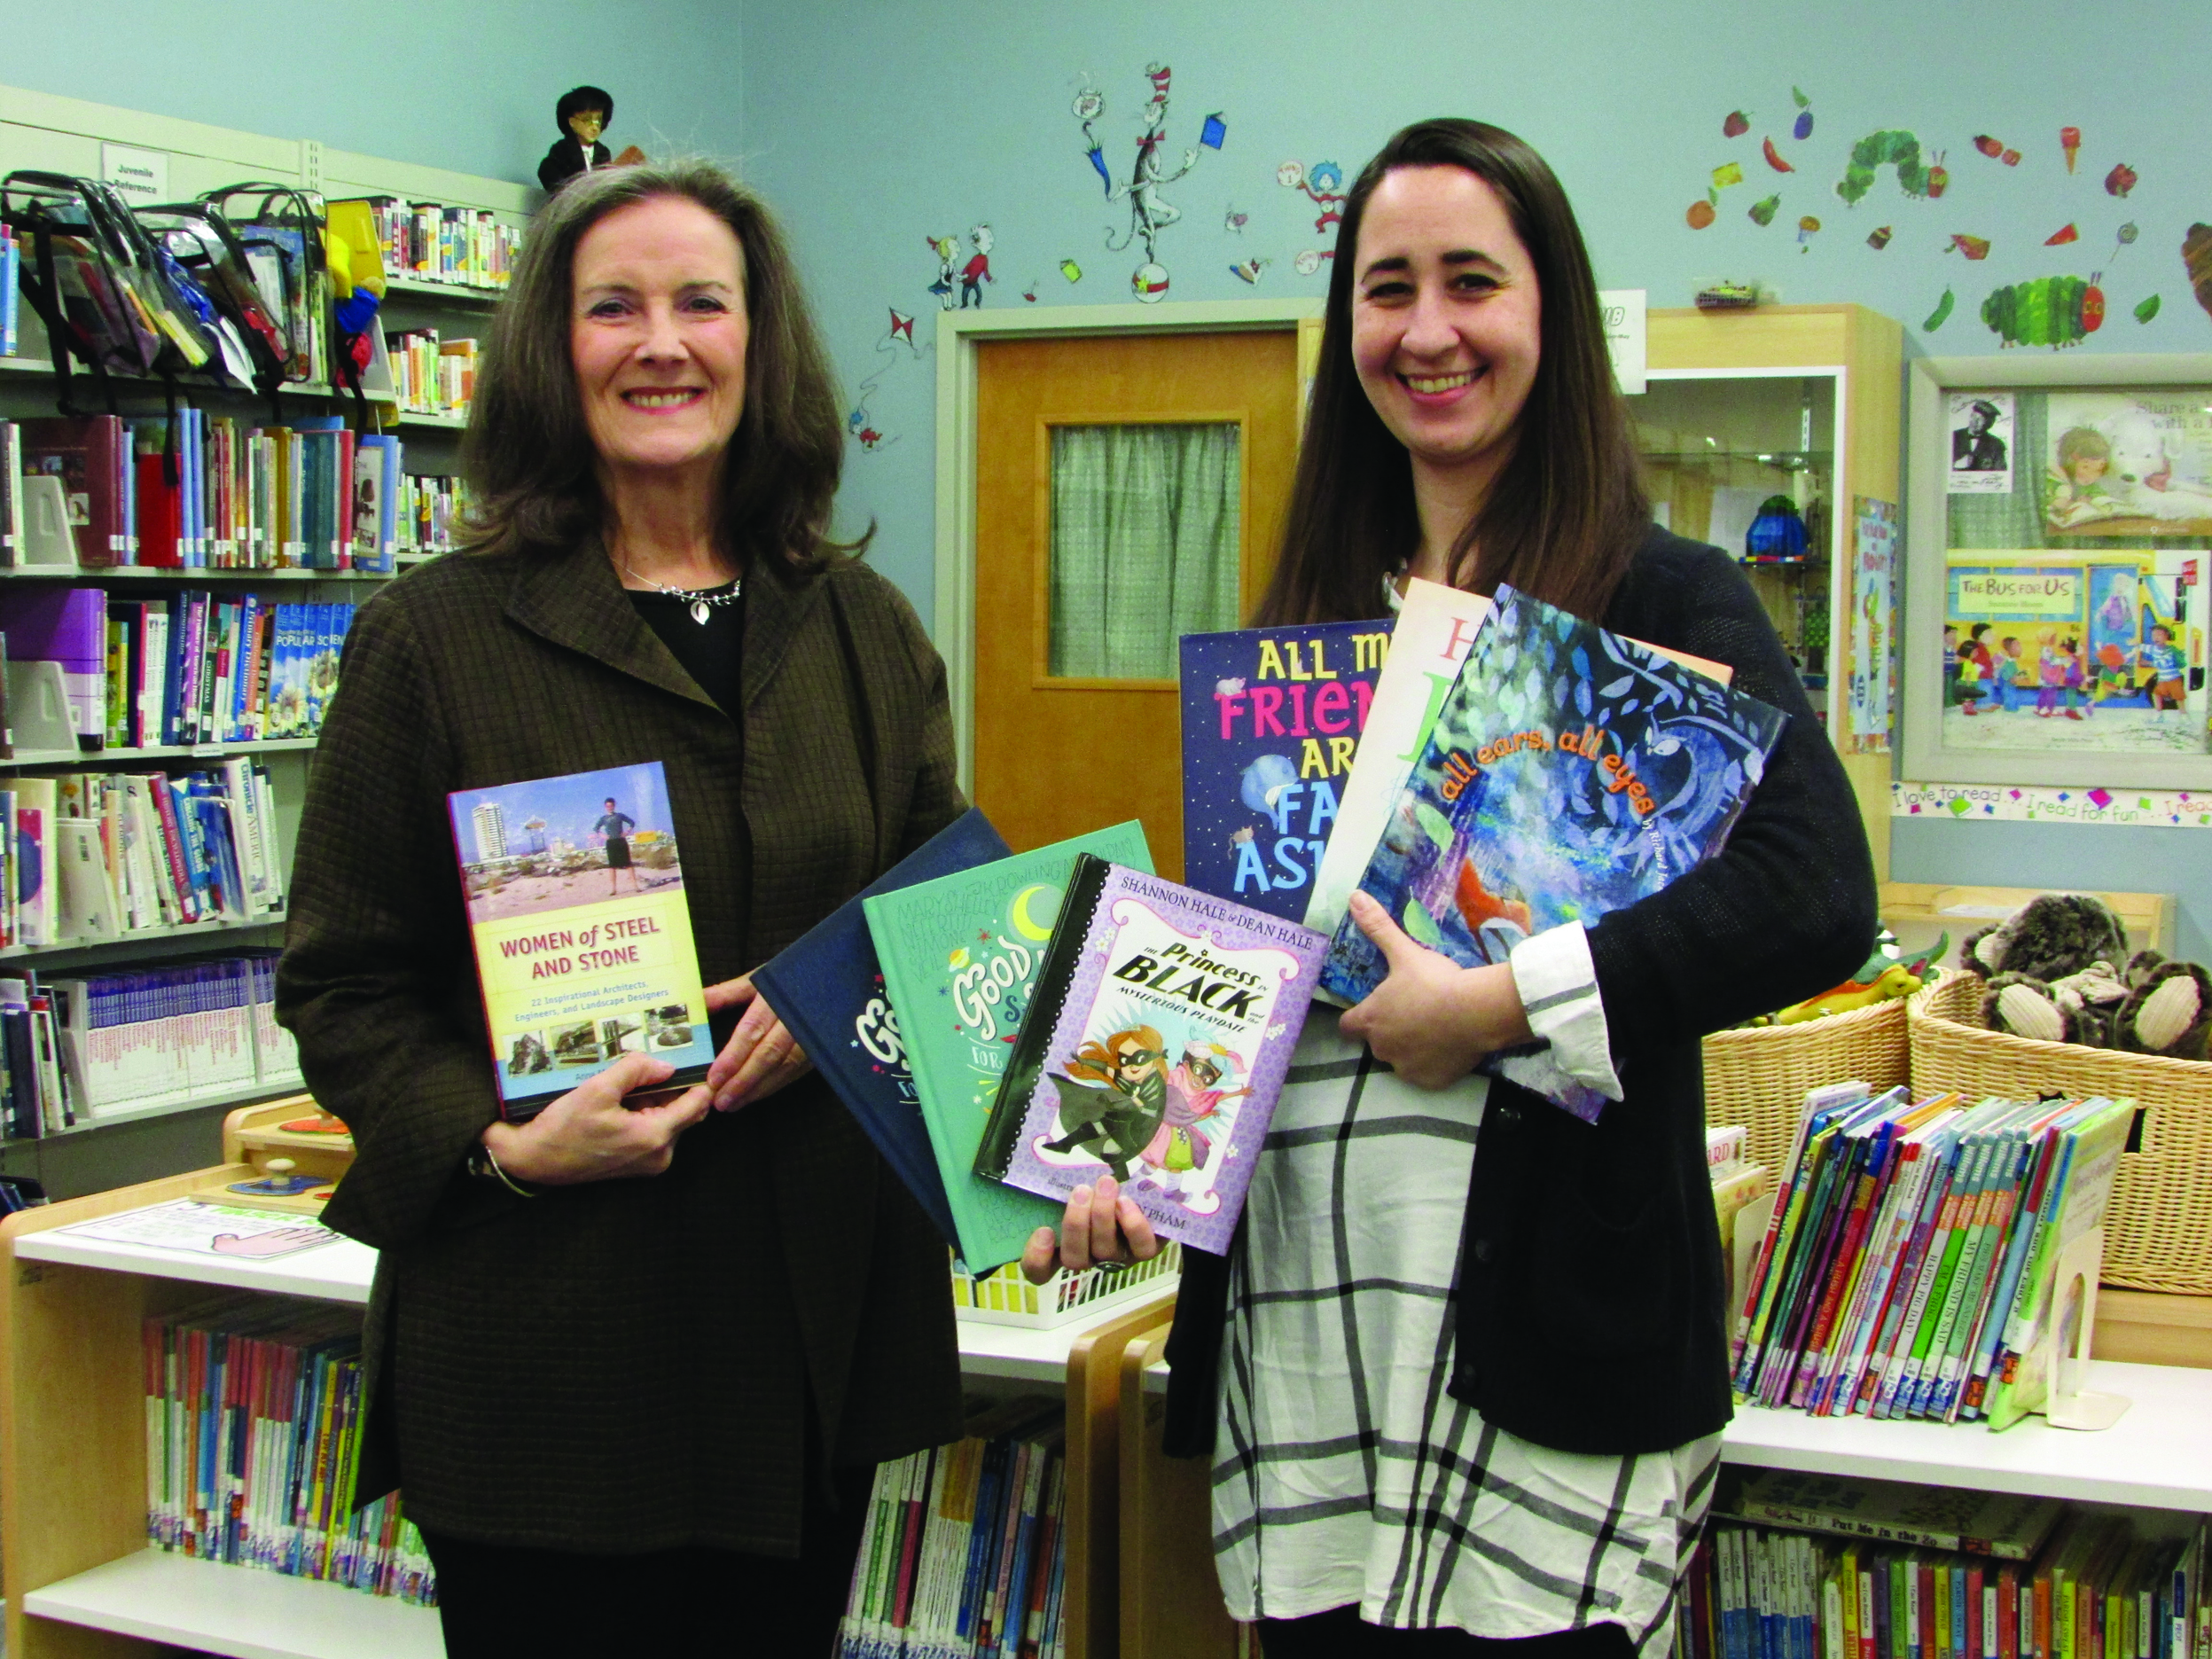 Bellefonte Woman's Club supports literacy and history | News, Sports ...